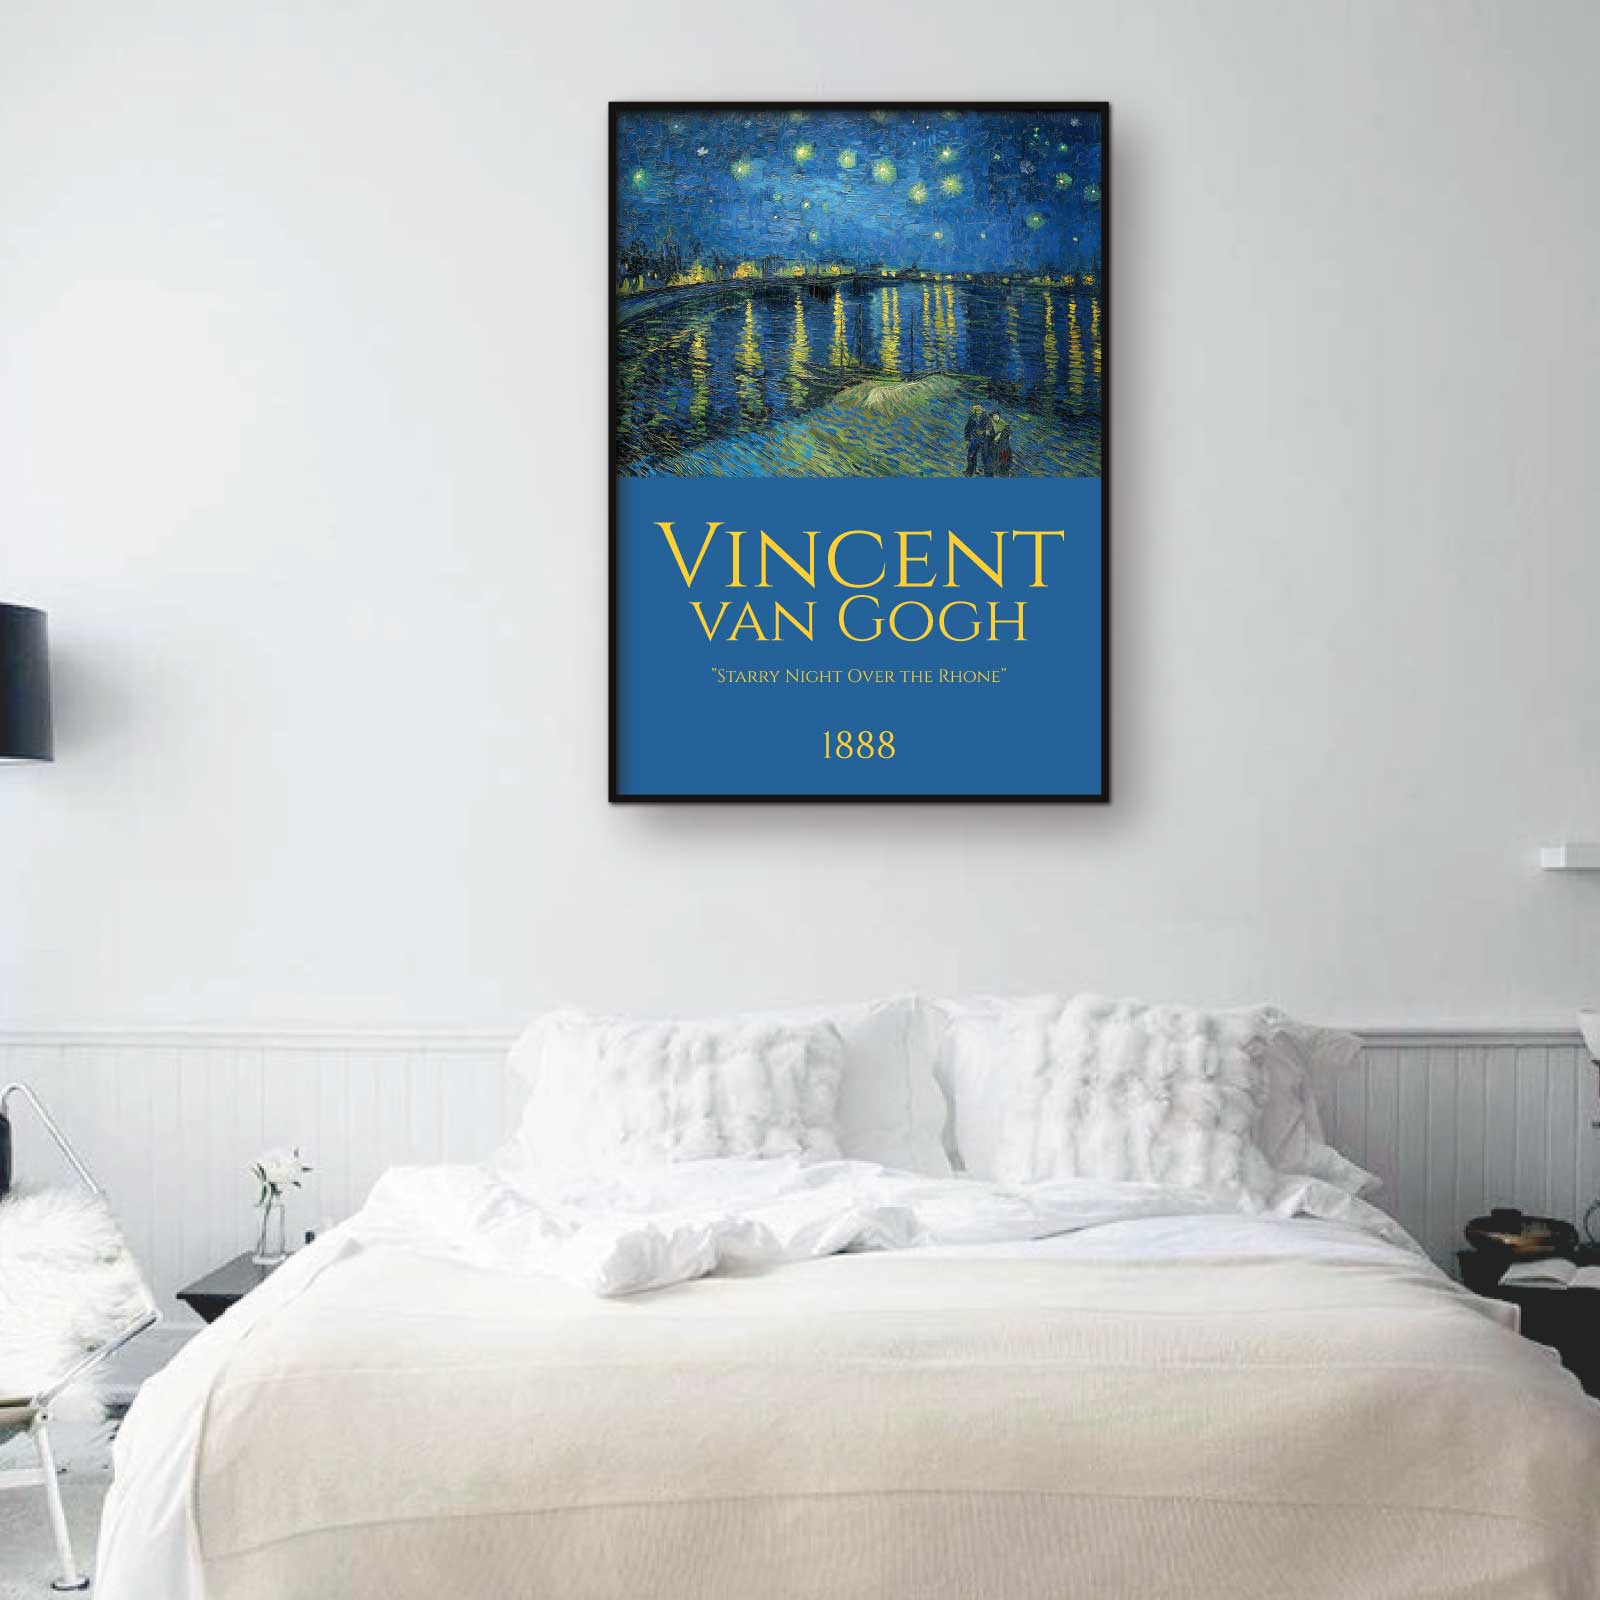 Art poster with the van Gogh painting "Starry night over the Rhone"